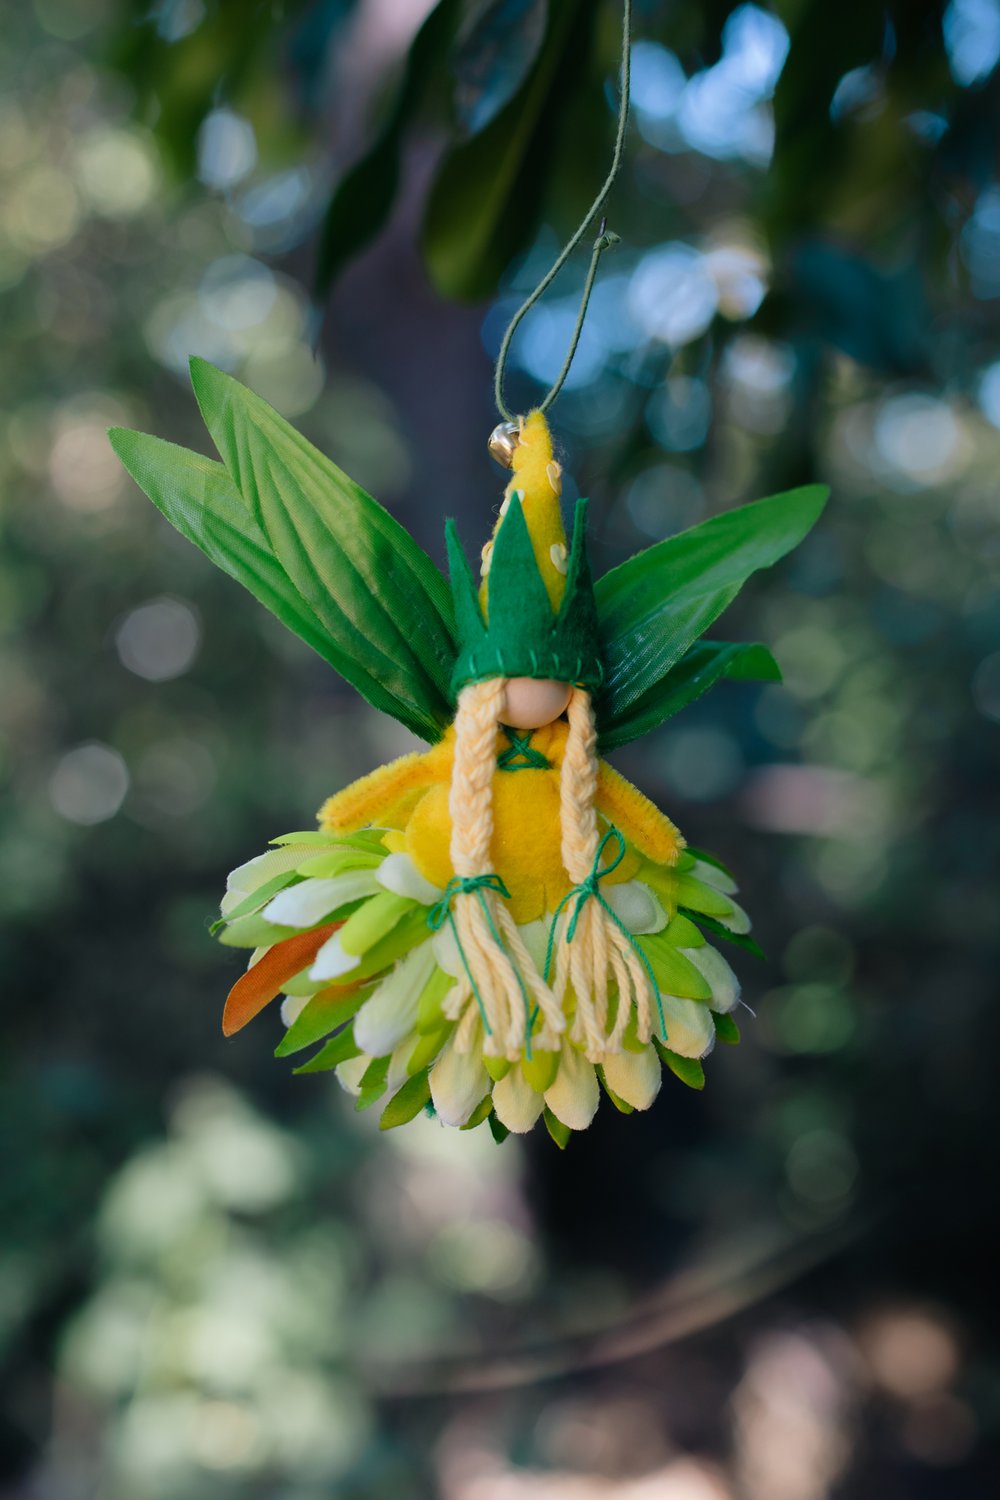 Forest Fairy Crafts Giveaway - Cornelia the Corn Fairy by Lenka